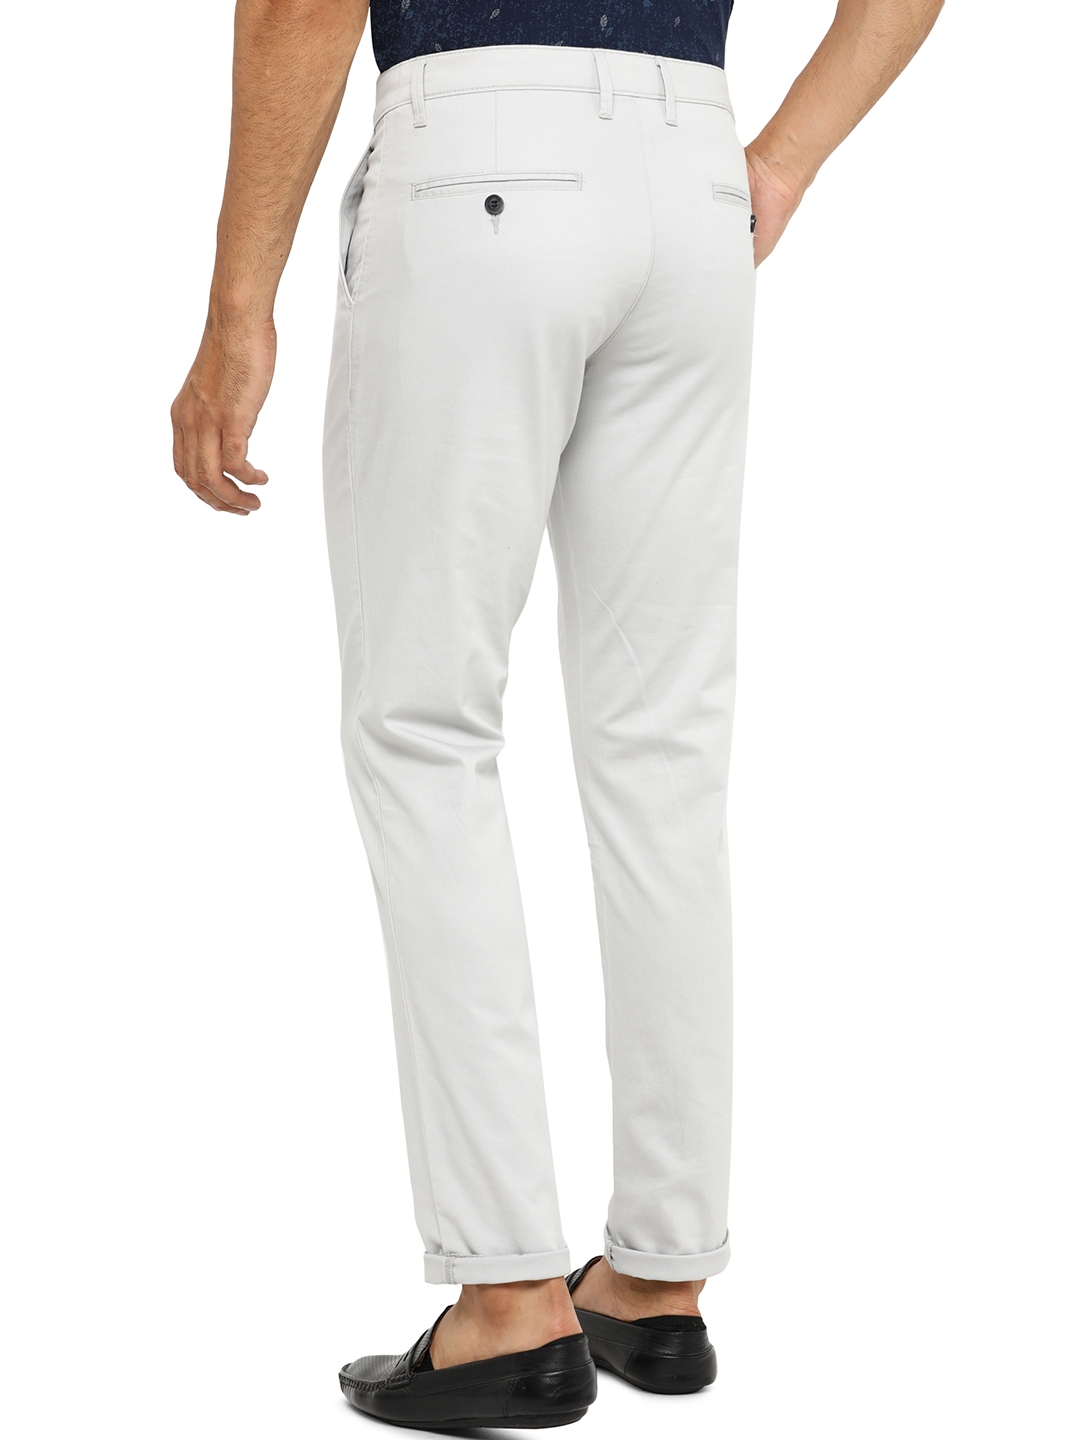 Greenfibre | Light Grey Solid Slim Fit Casual Trouser | Greenfibre 2